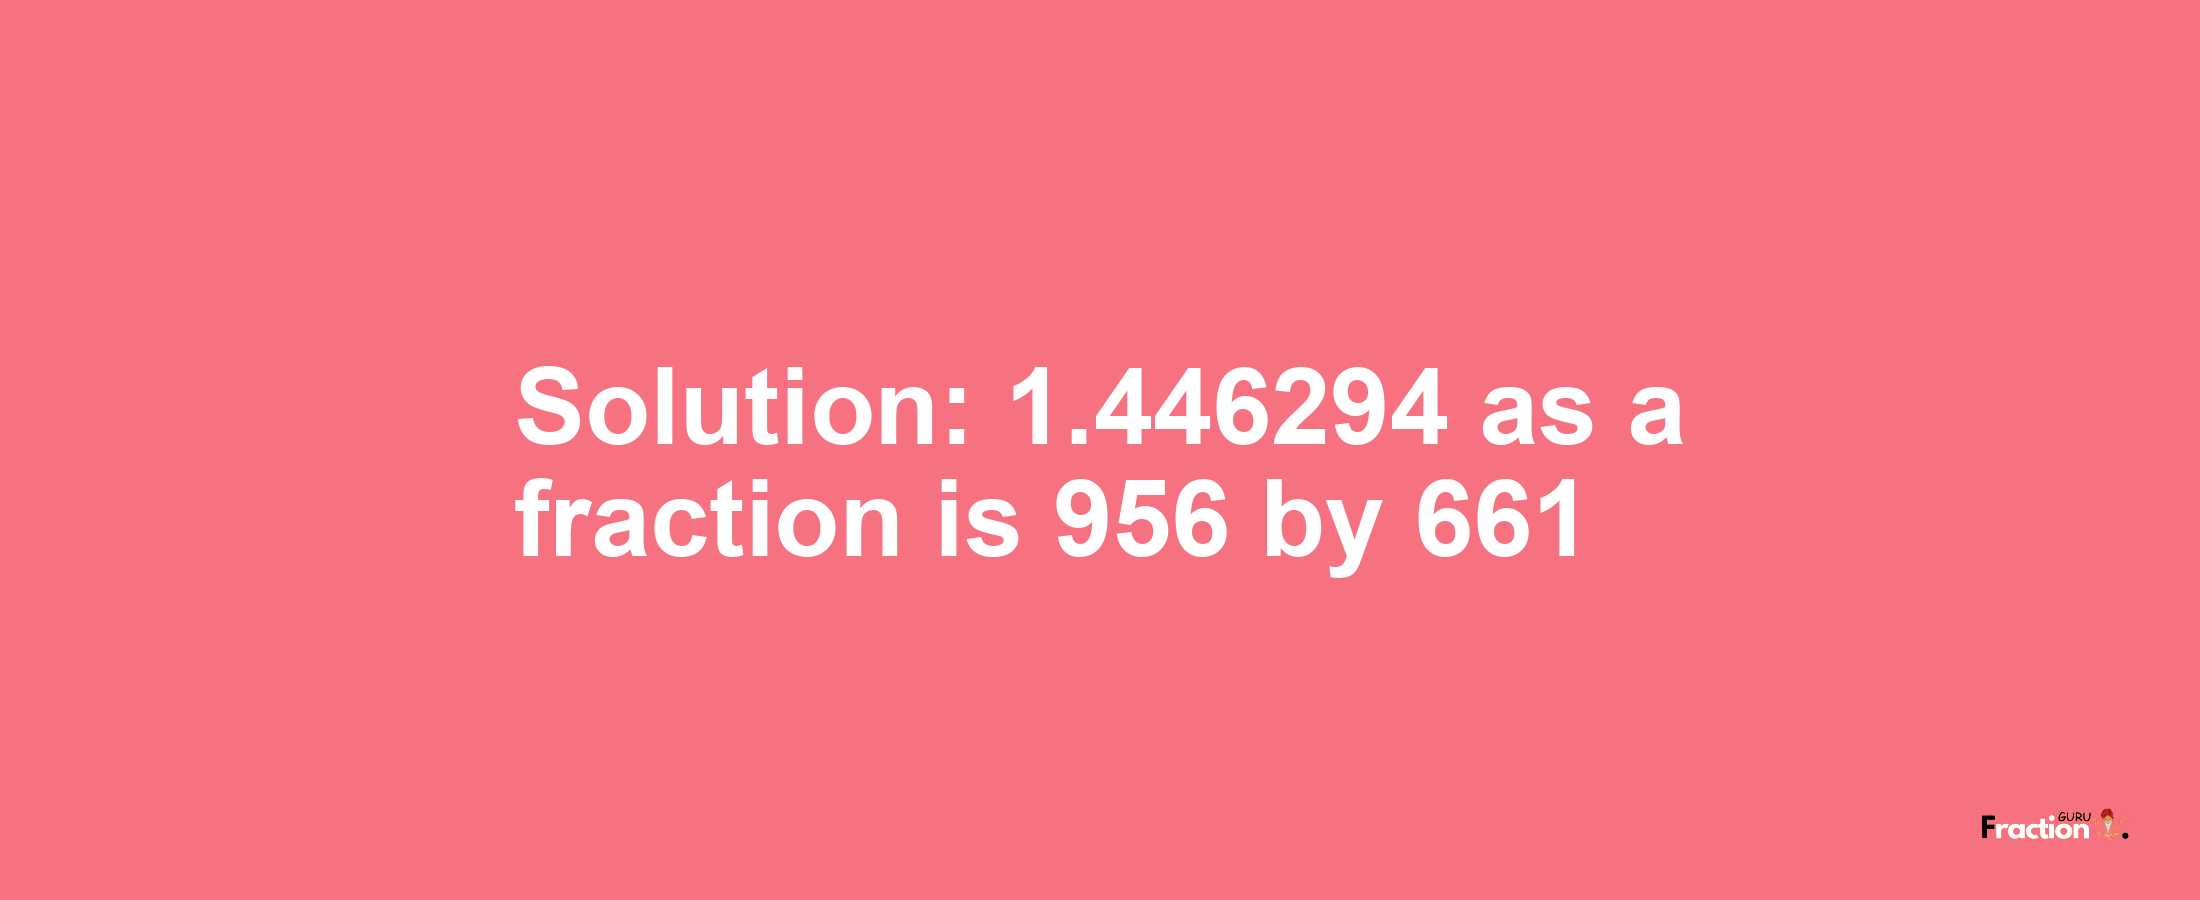 Solution:1.446294 as a fraction is 956/661